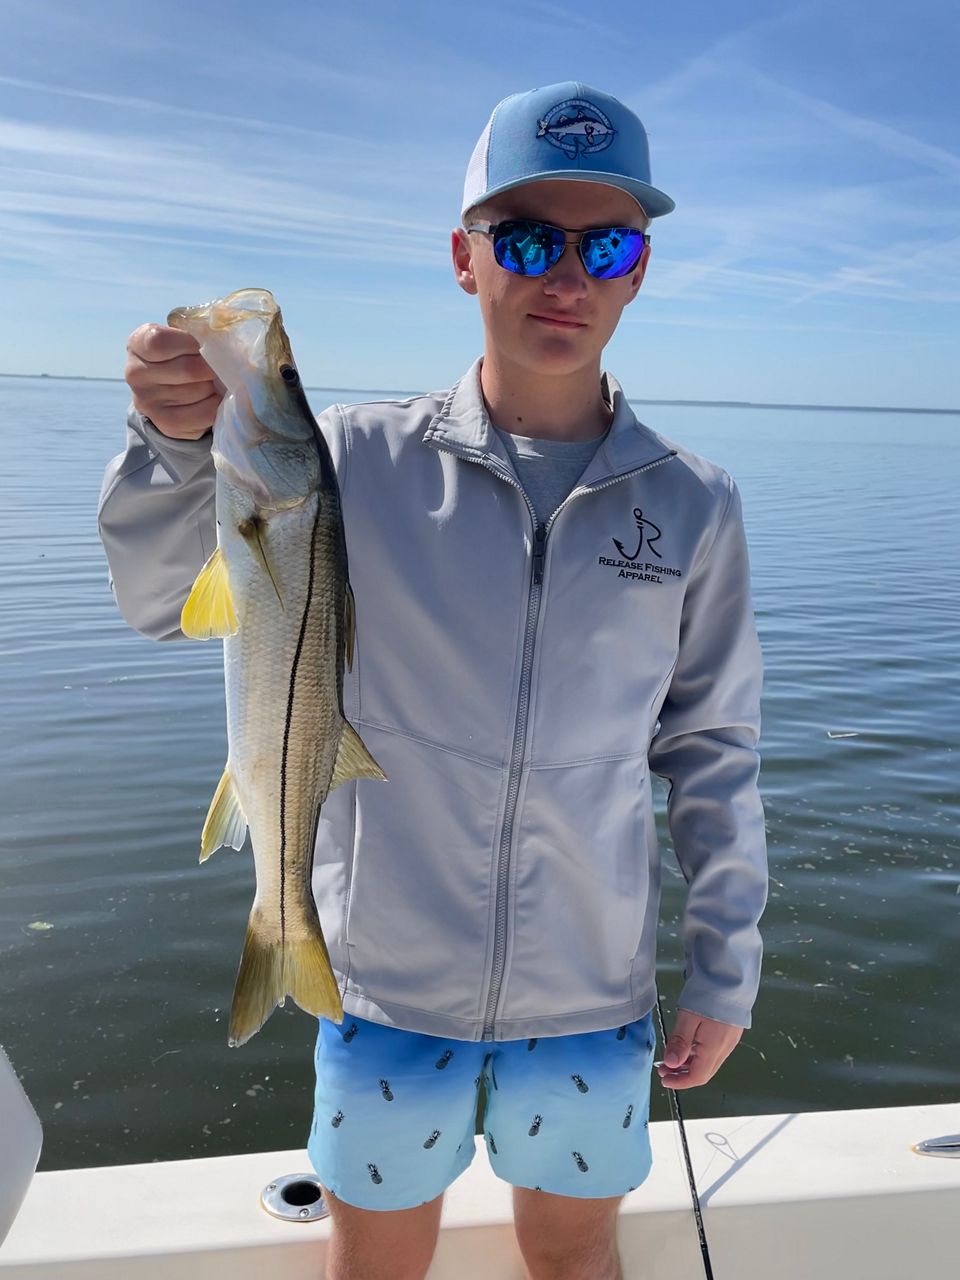 Teen rides wave of success with fishing apparel business